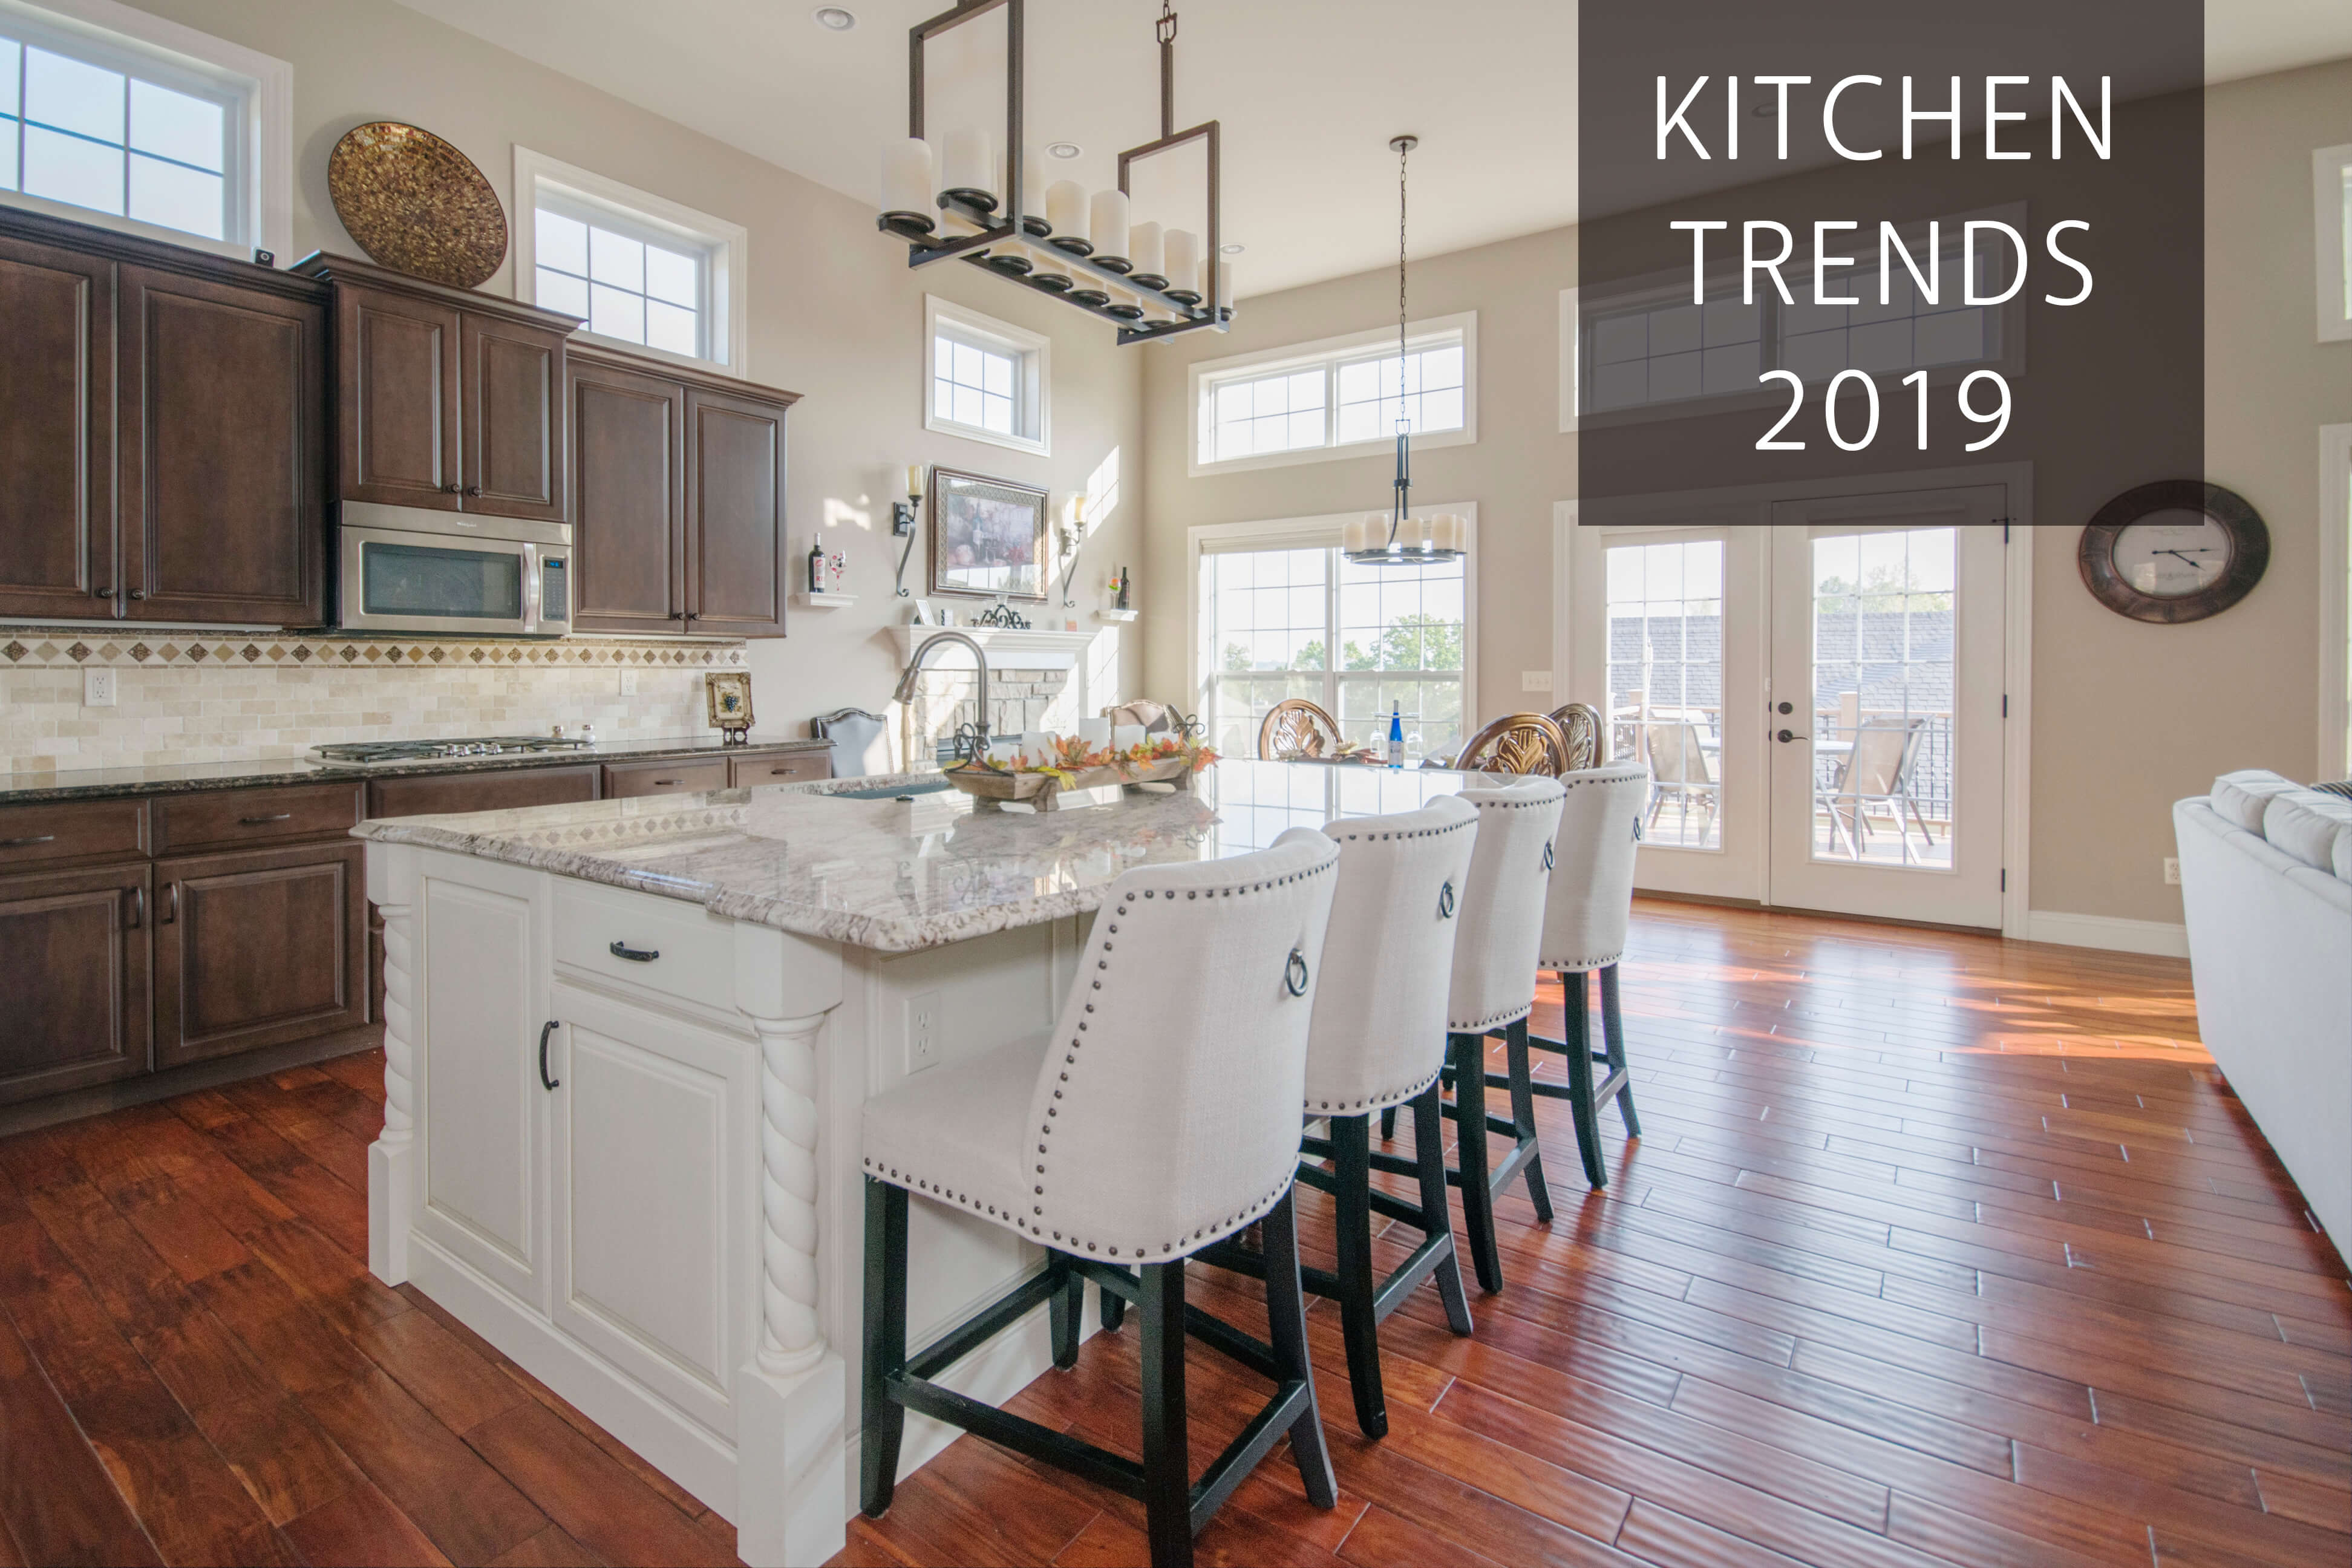 Top 5 Kitchen Trends In 2019 Williams Kitchen Bath - the dominating trend for the past few years has been creating a minimalist look in the kitchen space this year kitchens will begin to take on a more